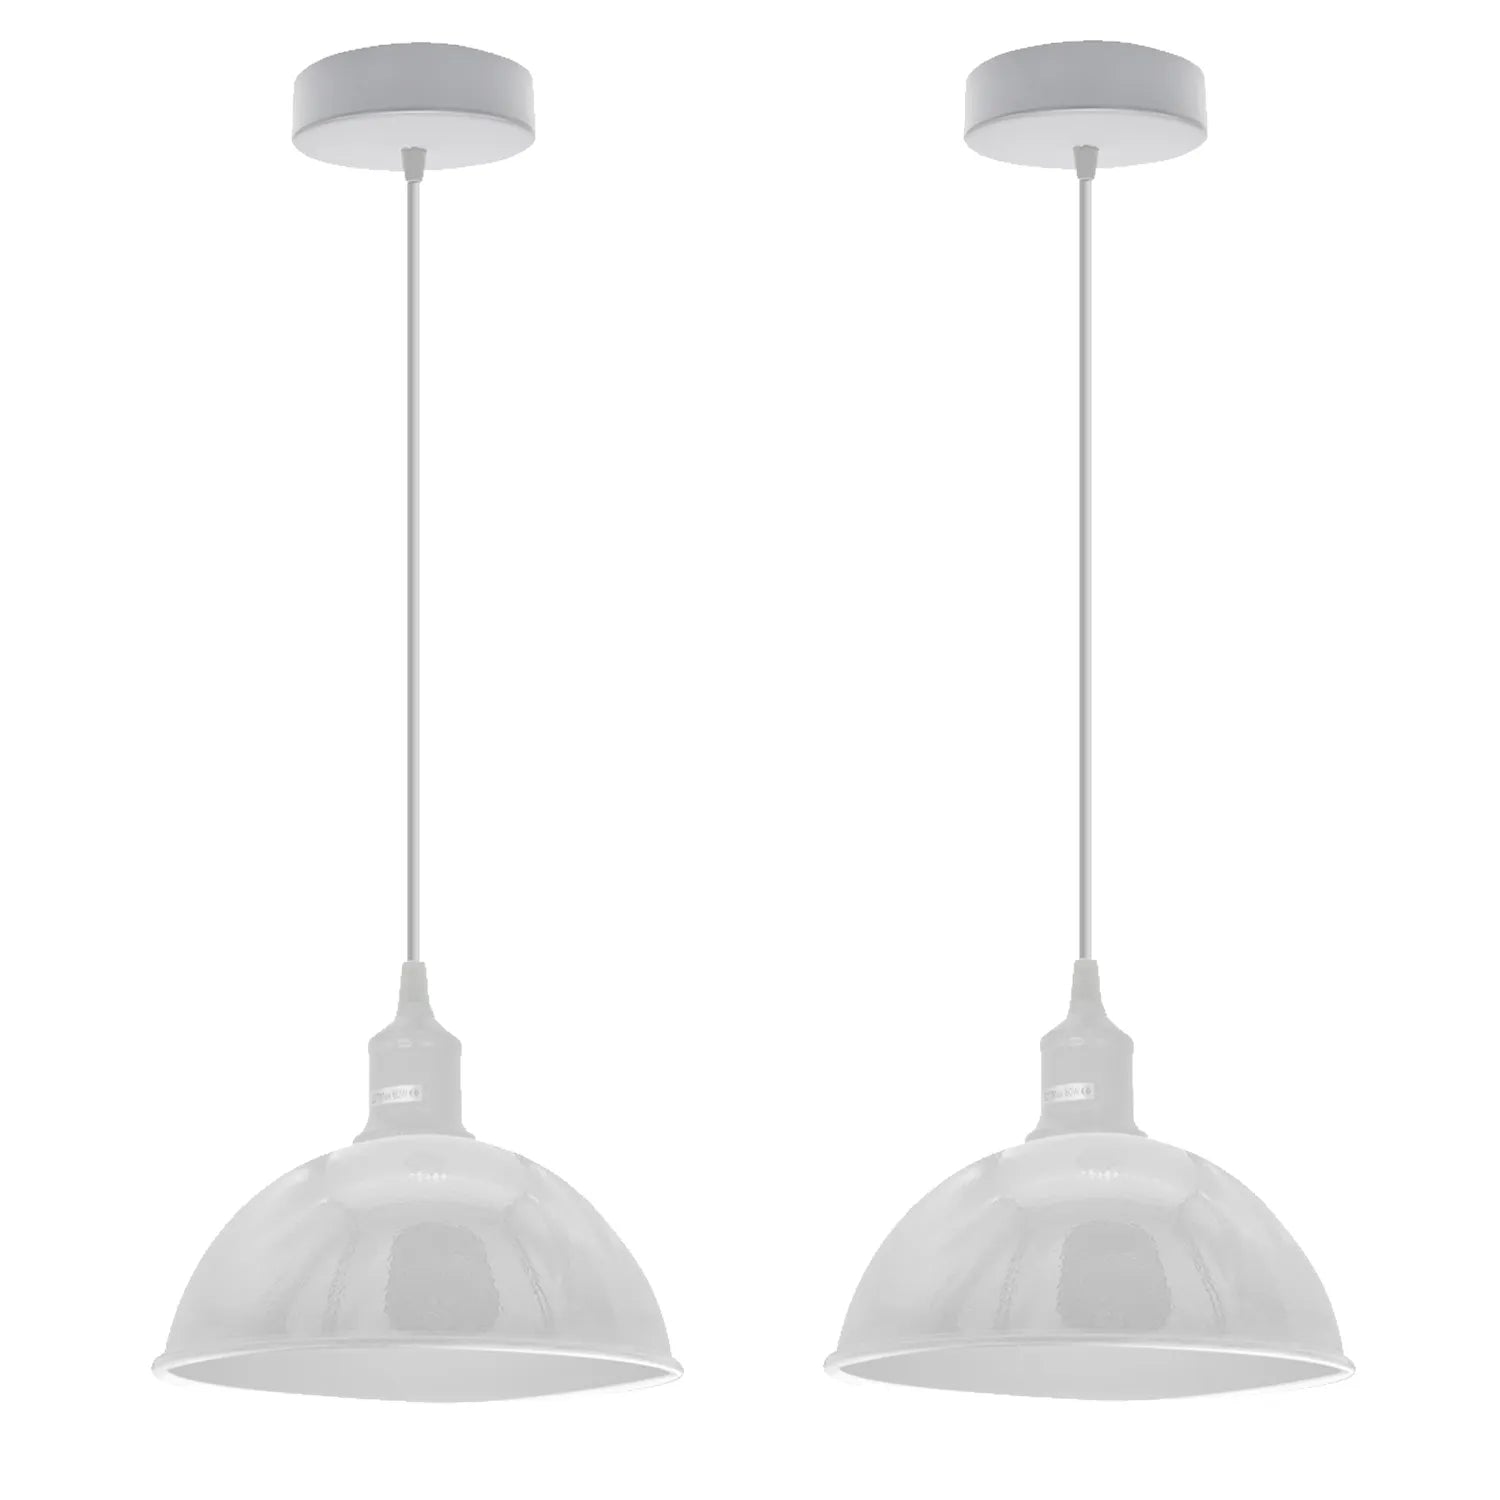 2Pack Dome Shaped White Vintage Industrial Retro Metal Ceiling Lamp Shade ~4337